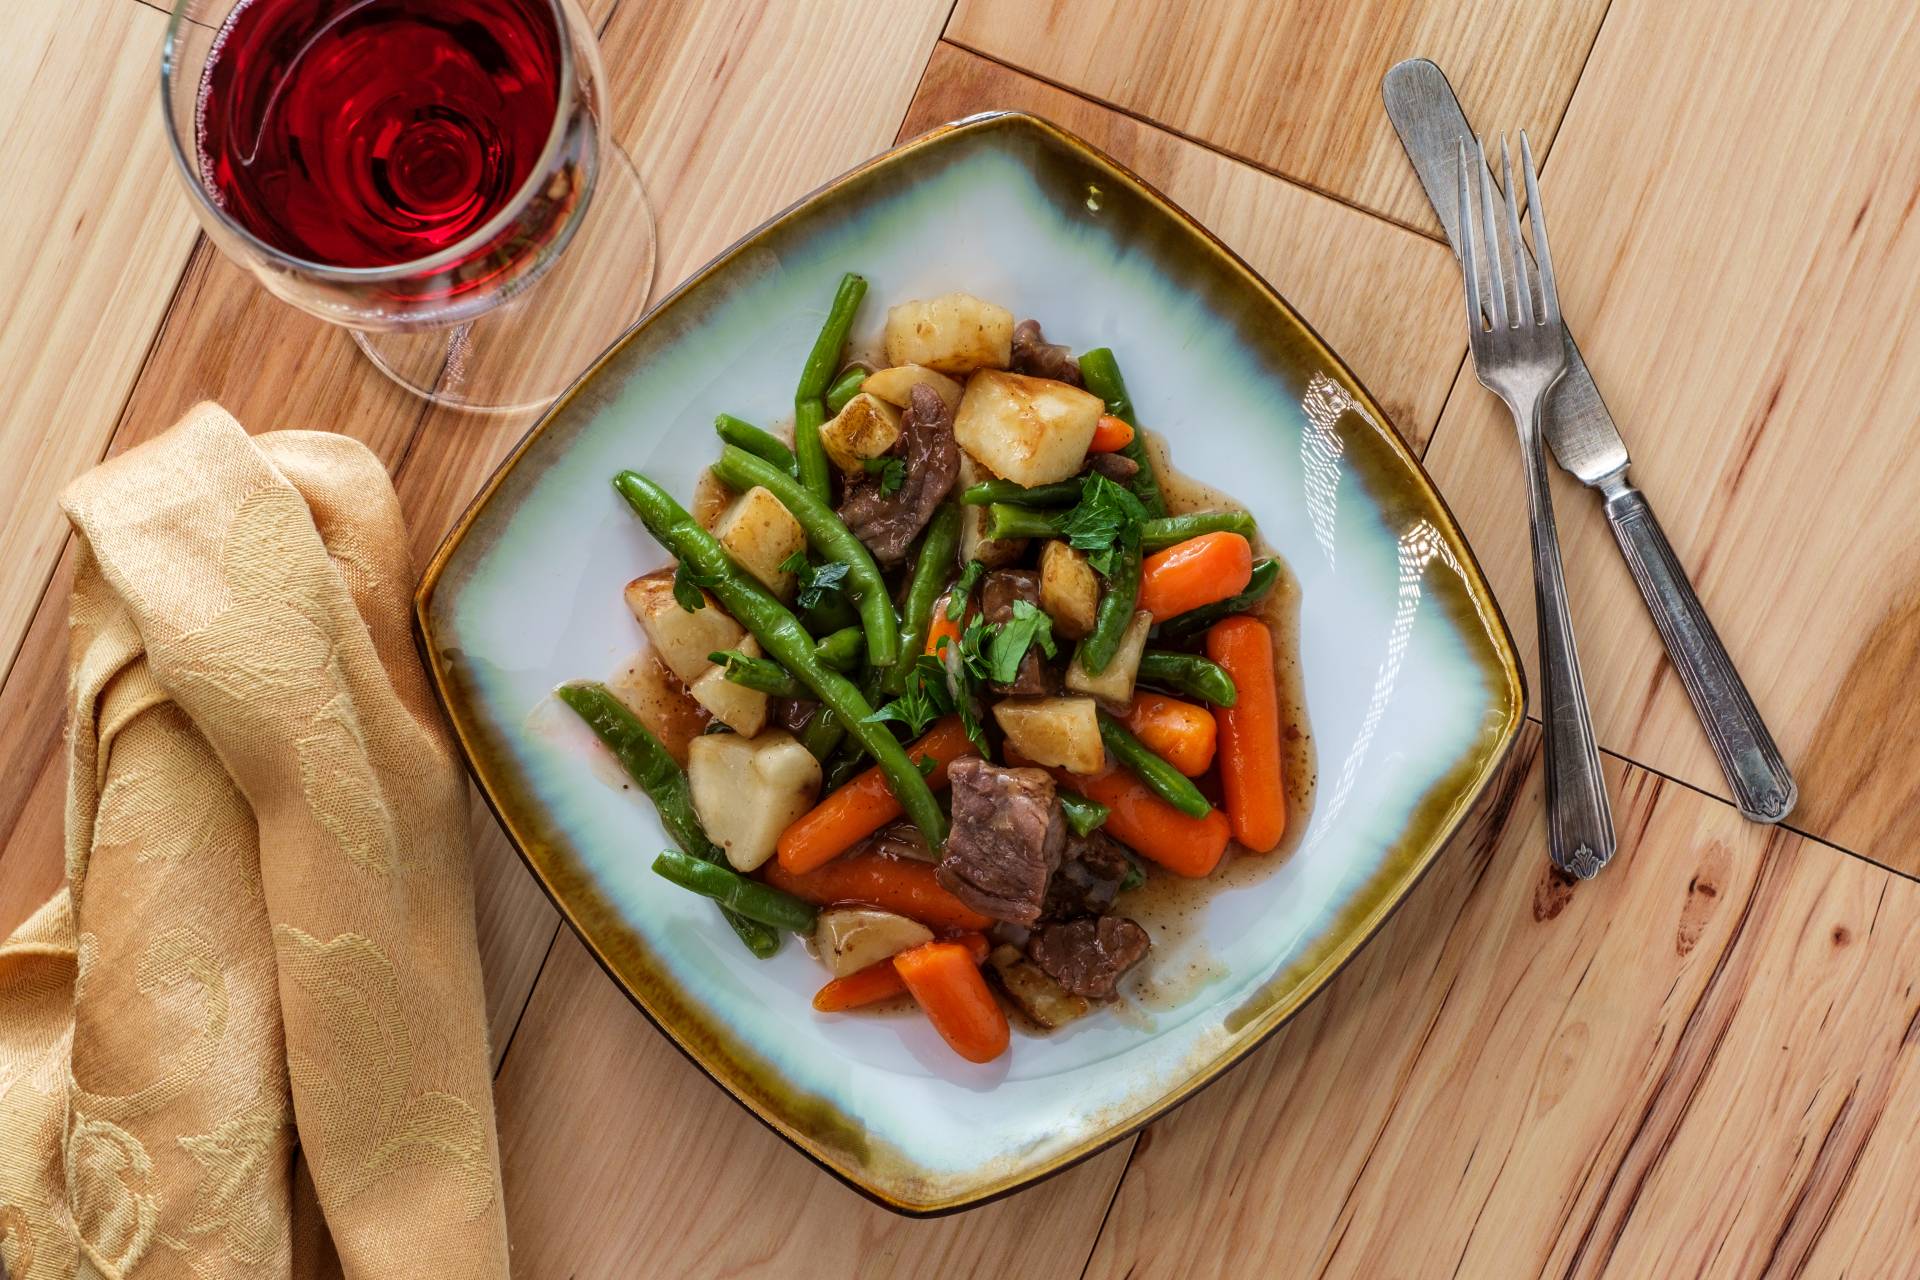 Braised Beef & Gravy with Potatoes, Carrots & Green Beans